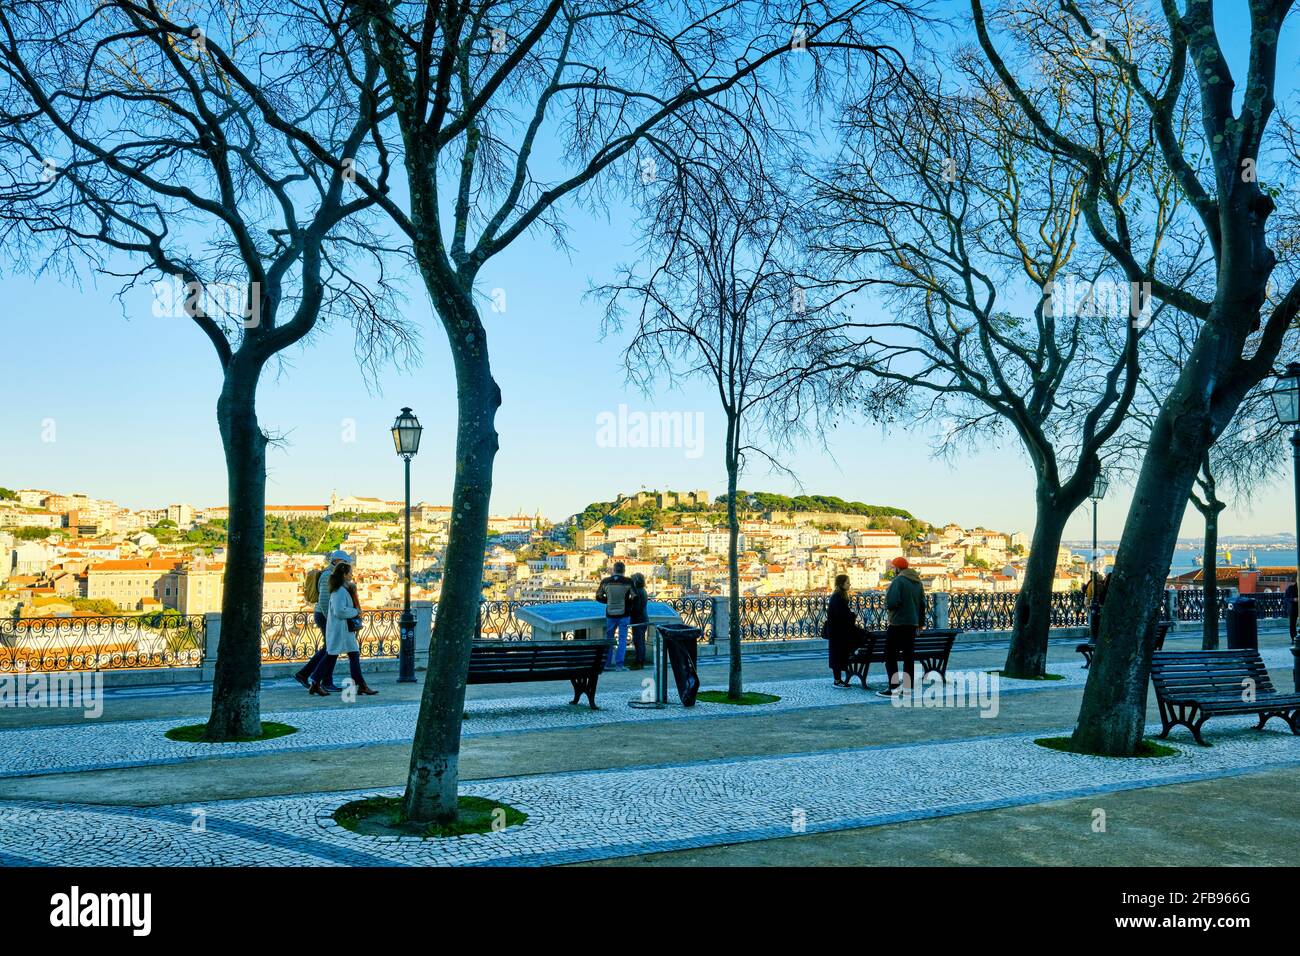 Sao Pedro de Alcantara belvedere, one of the best view points of the old city of Lisbon. Portugal Stock Photo